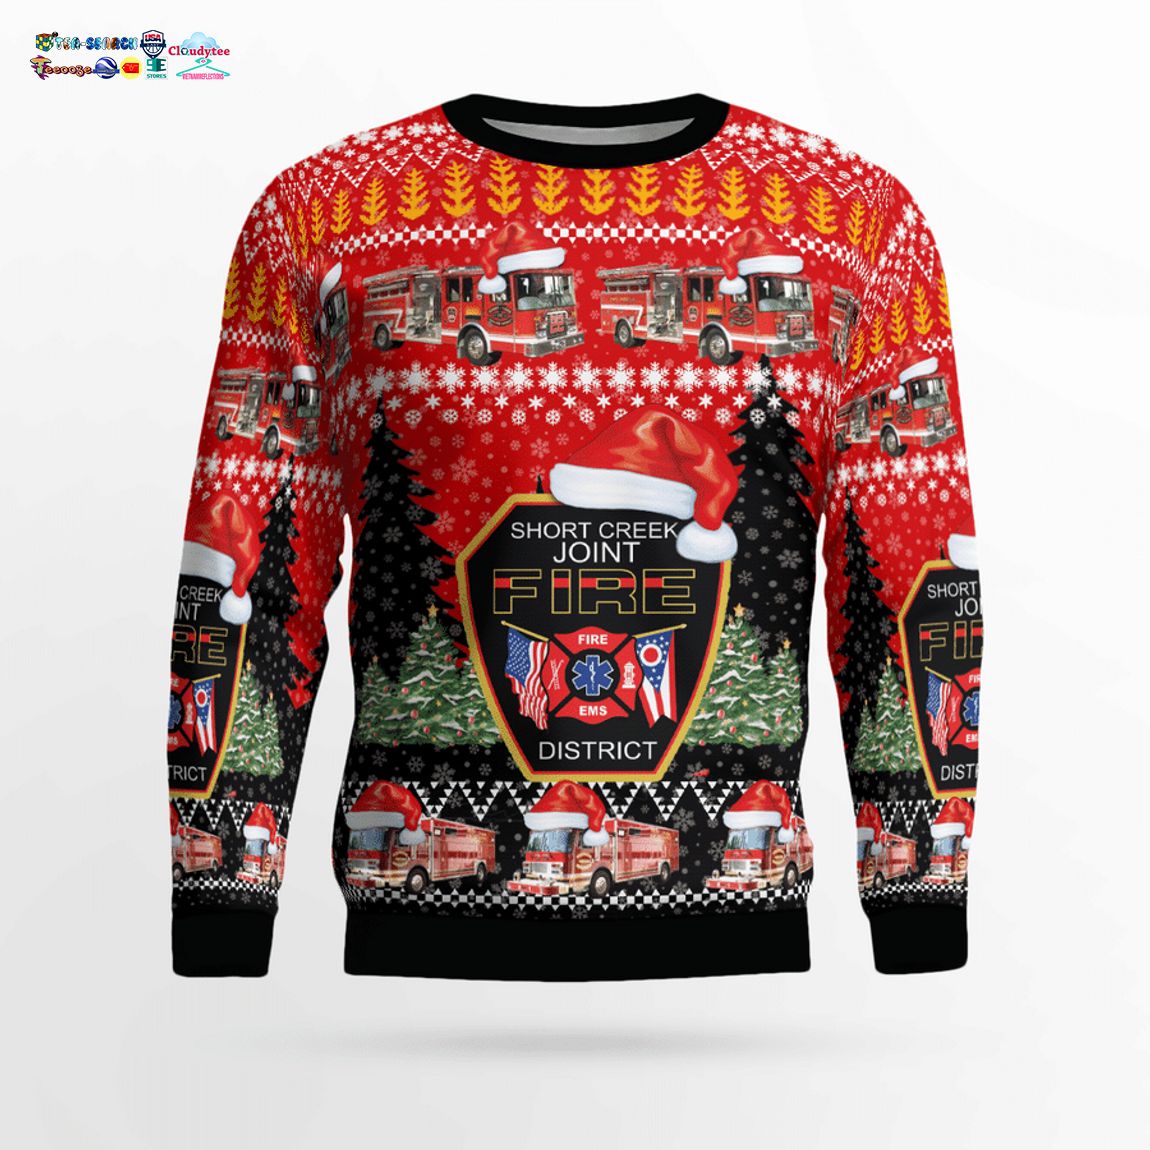 Ohio Short Creek Joint Fire District 3D Christmas Sweater - Cool look bro